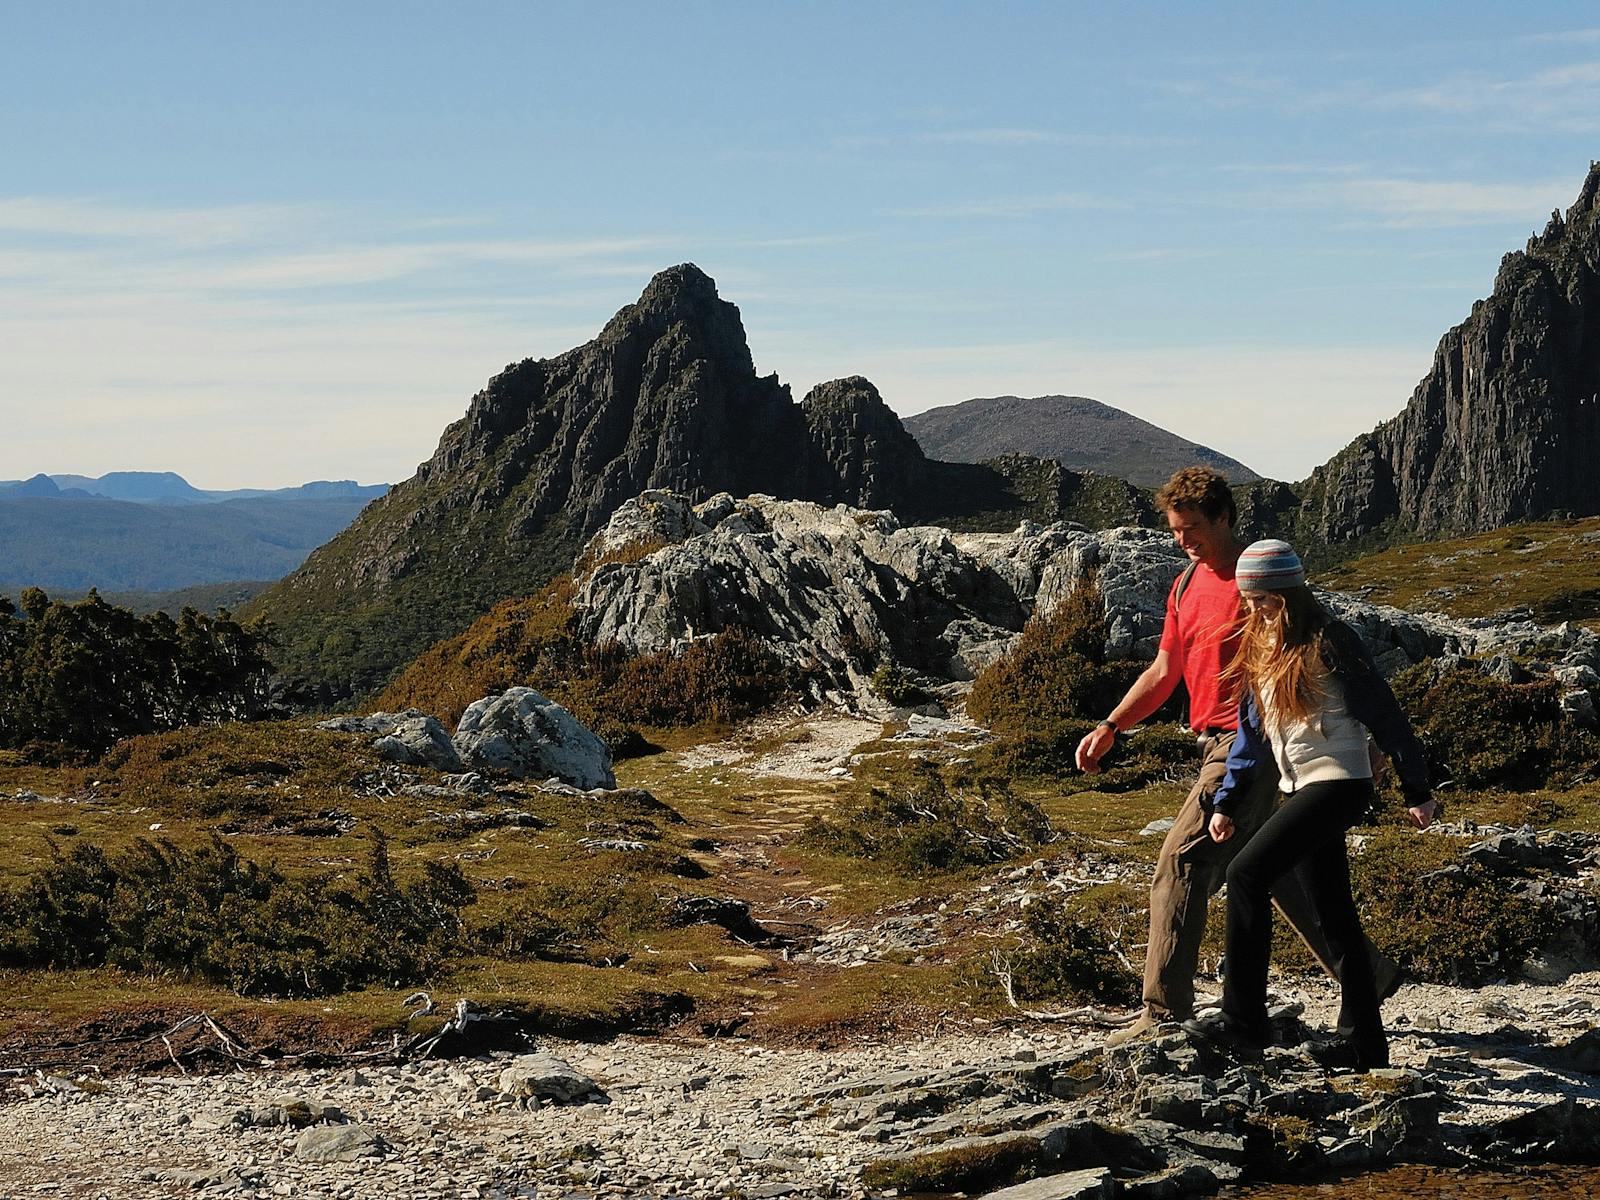 Enjoy the stunning short walks as well as the extended hiking options